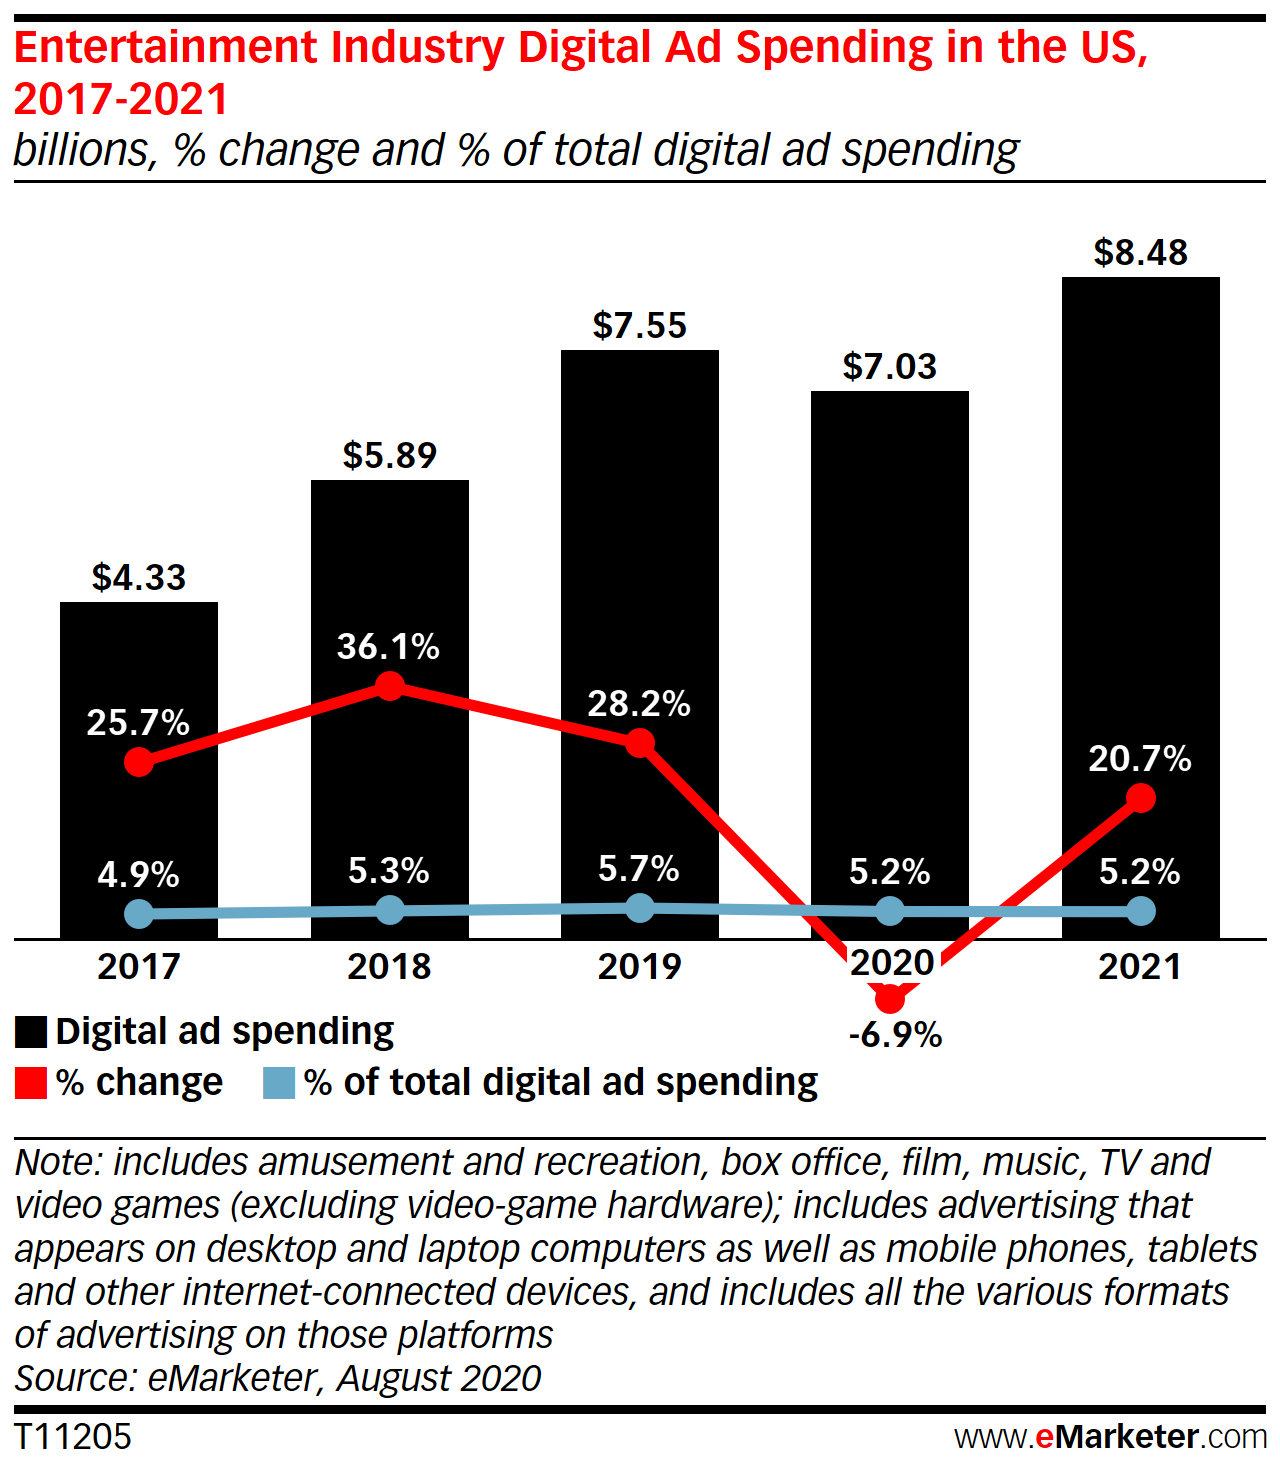 Entertainment Industry Digital Ad Spending in the US, 2017-2021 (billions, % change and % of total digital ad spending)